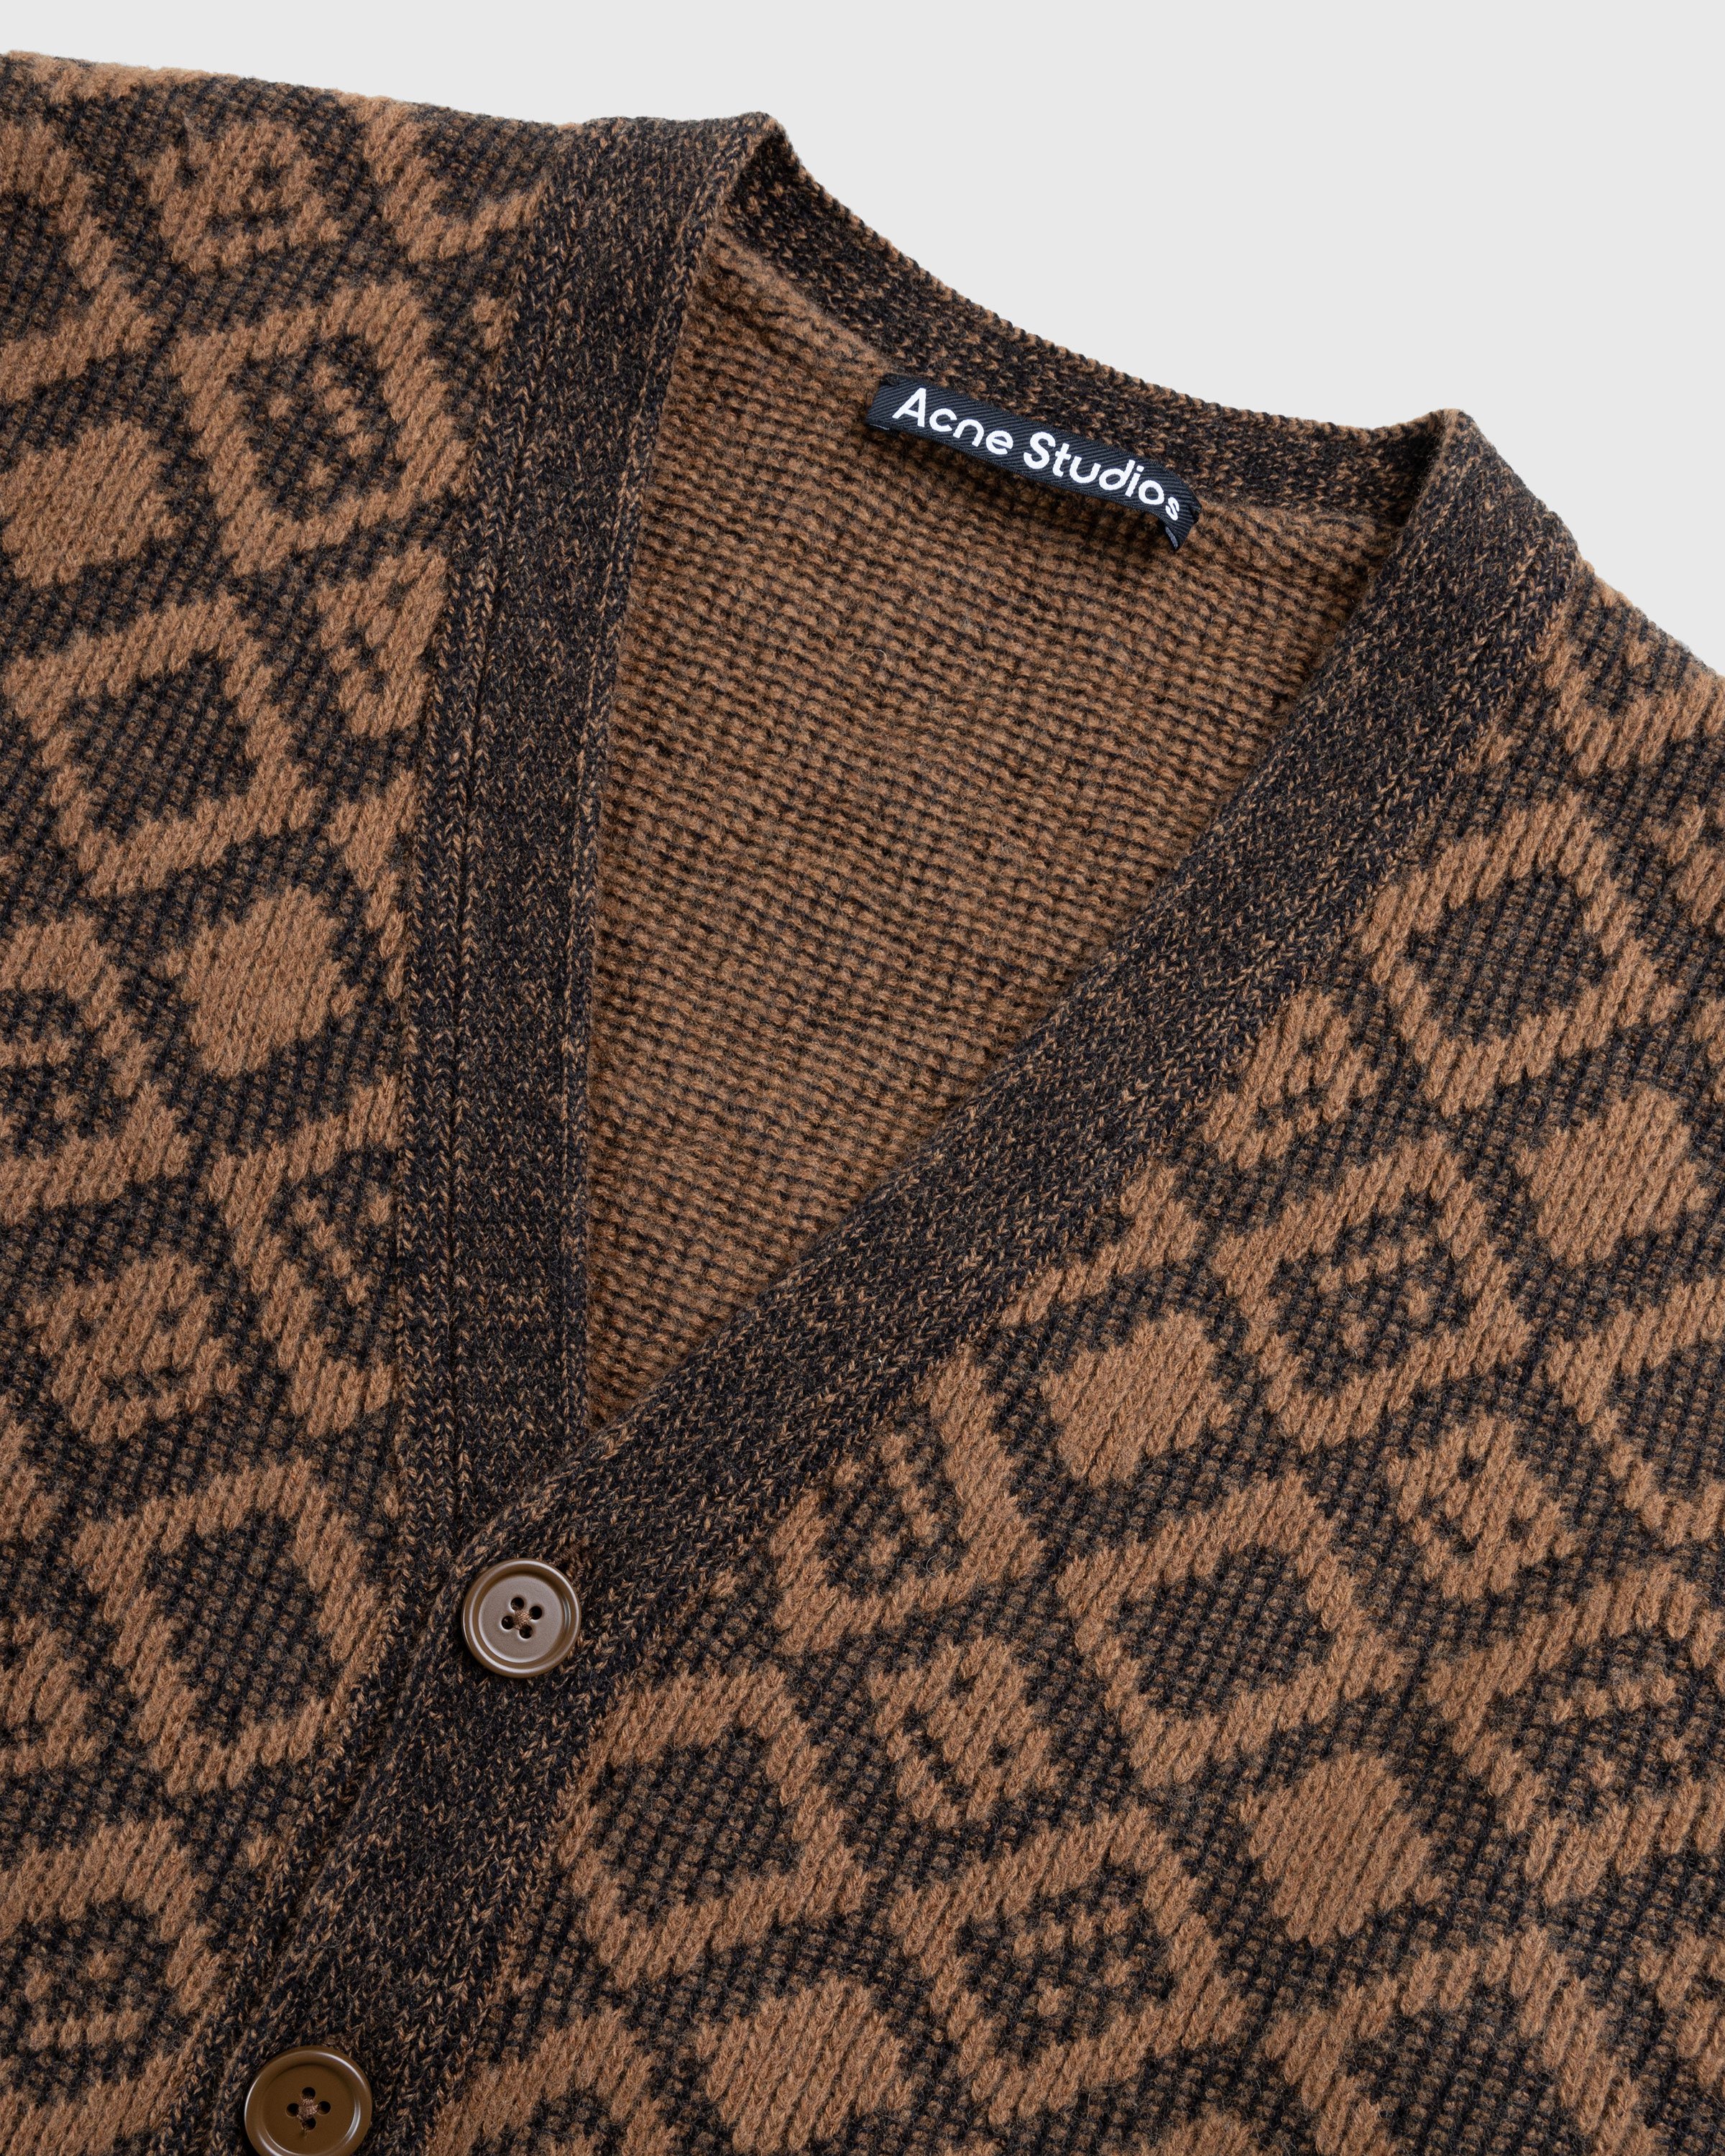 Acne Studios - face Tiles Cardigan Toffee Brown - Clothing - Brown - Image 5